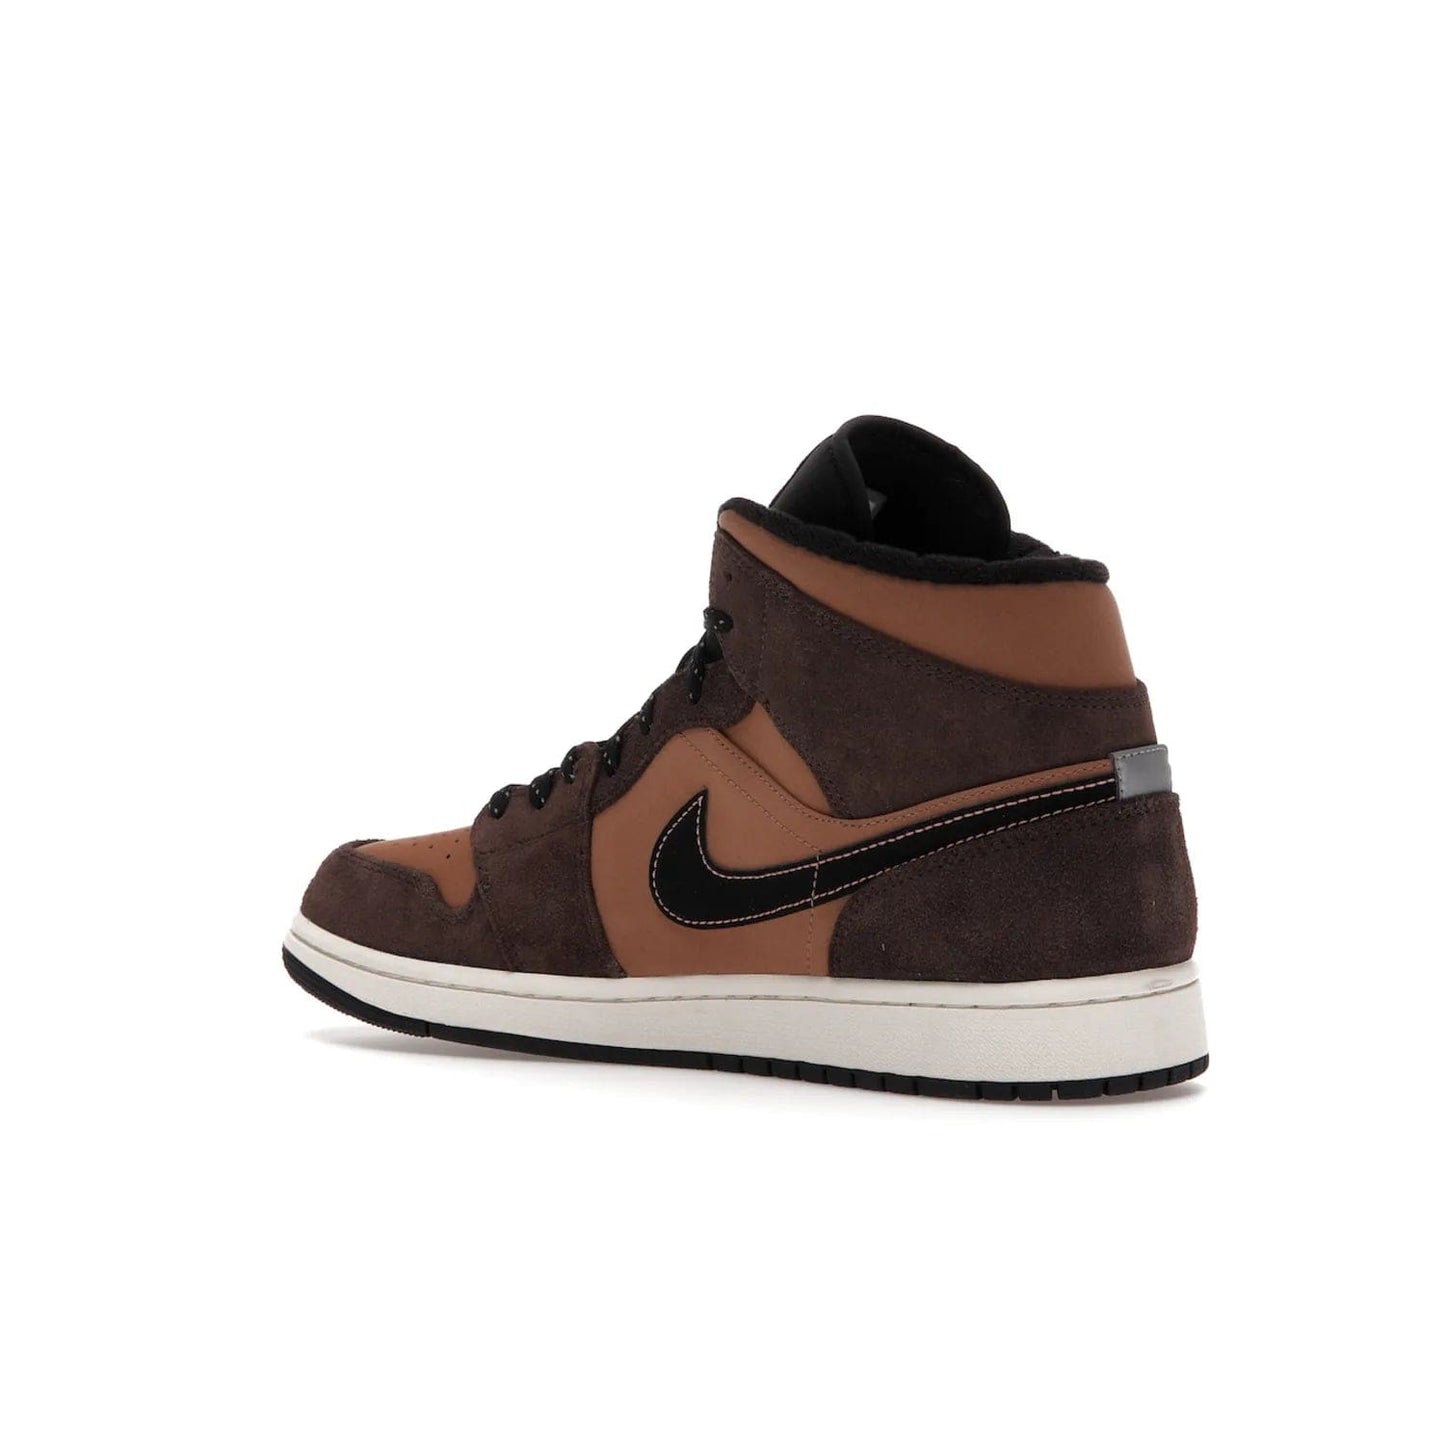 Jordan 1 Mid SE Dark Chocolate - Image 23 - Only at www.BallersClubKickz.com - This fashionable and functional Jordan 1 Mid SE Dark Chocolate features a light brown Durabuck upper, dark brown suede overlays, black Swoosh logos and reflective patch at heel. A must-have for any sneakerhead!